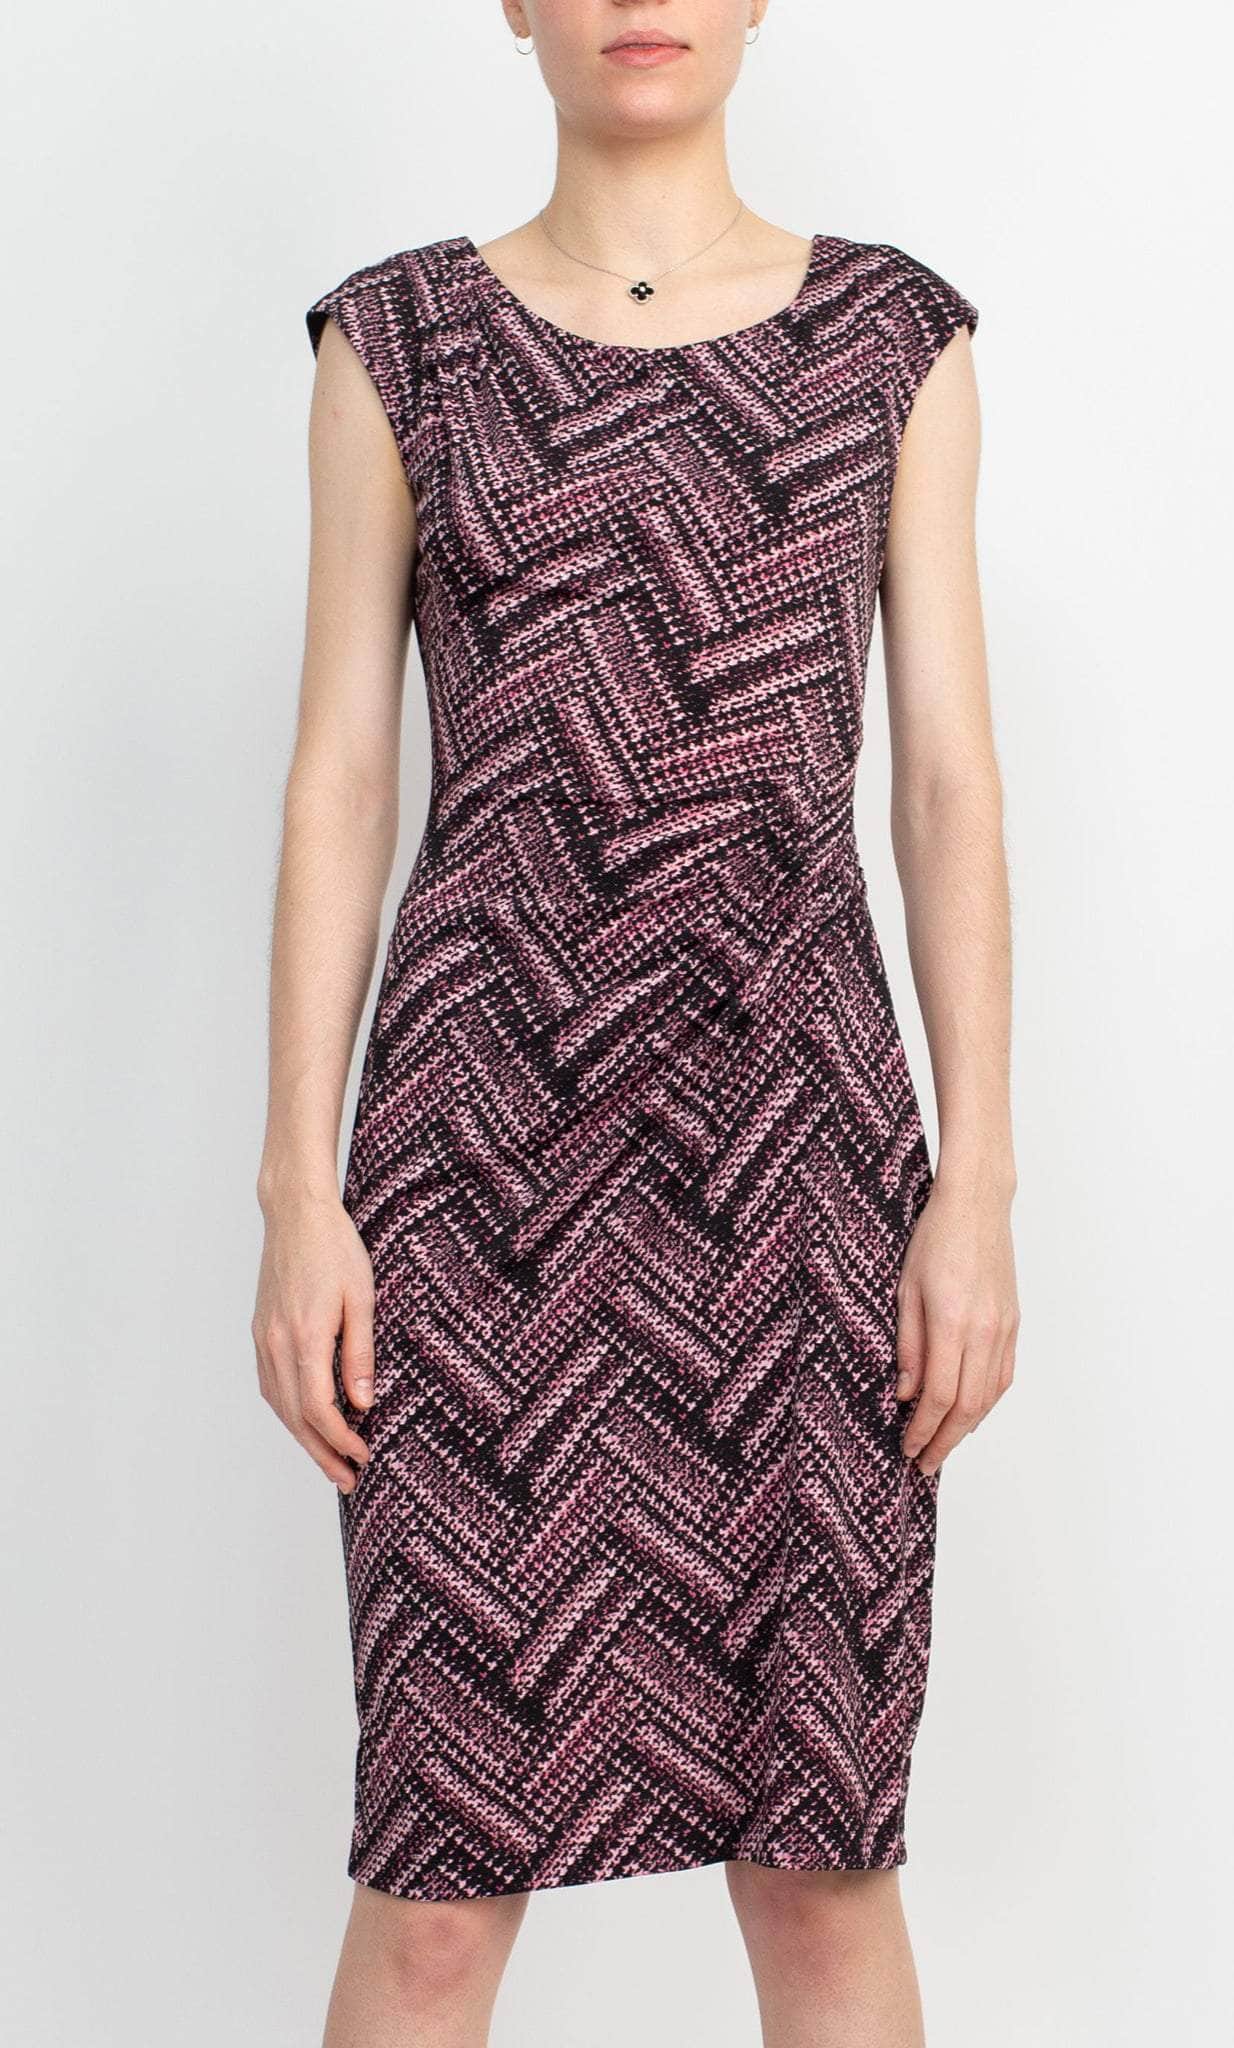 Image of Connected Apparel TBD00676M1 - Cap Sleeve Multi Printed Cocktail Dress